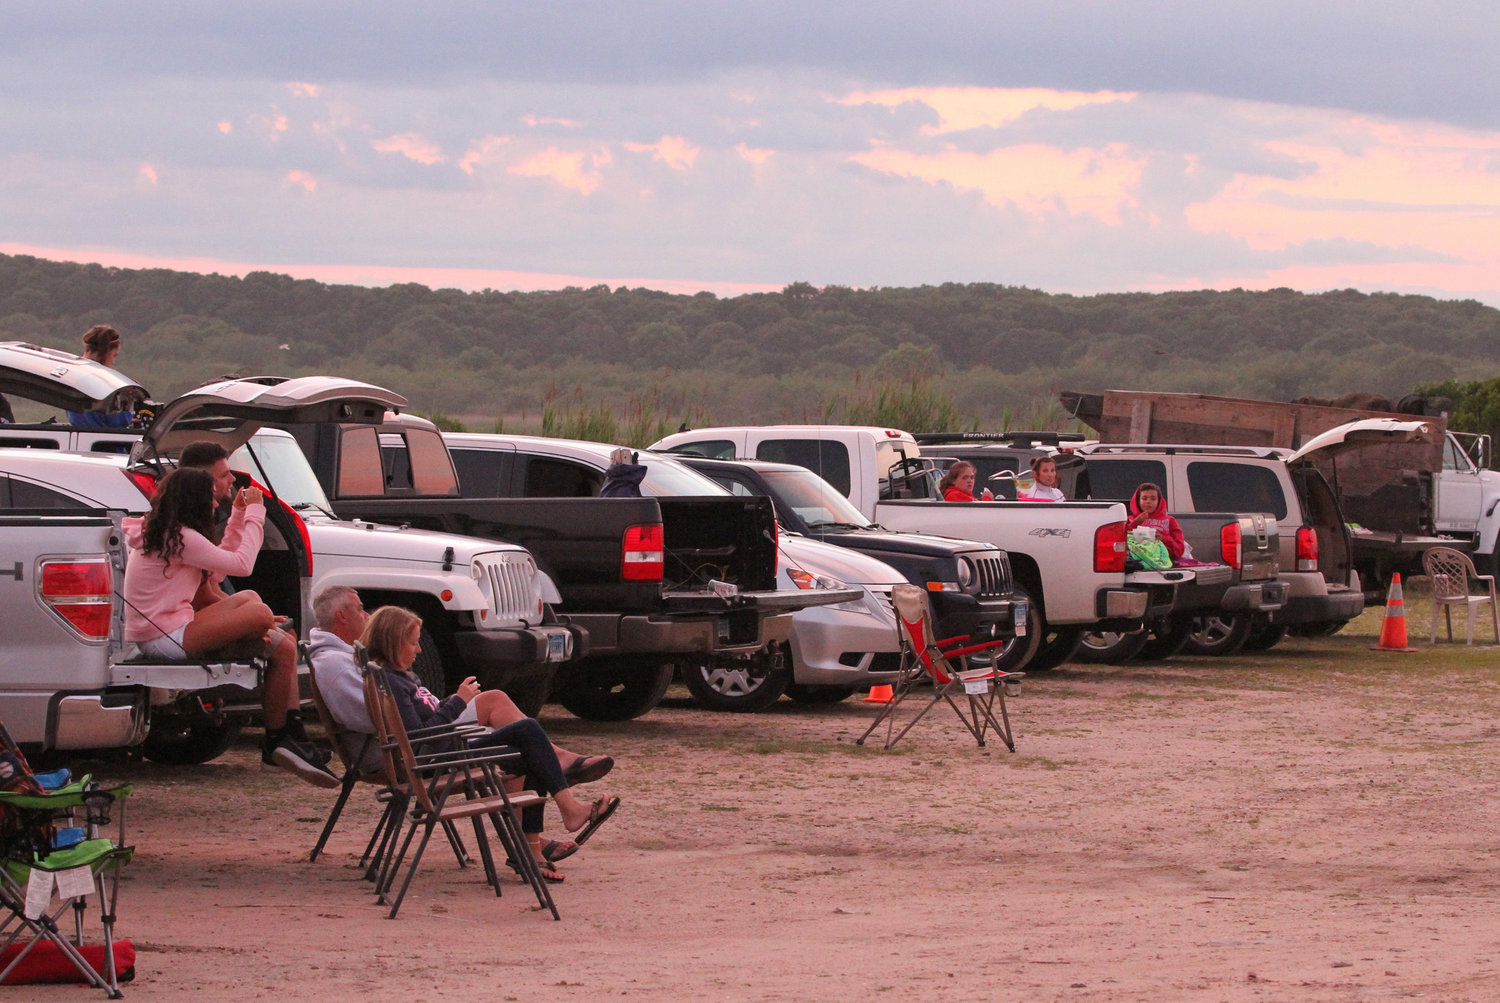 Now playing: Classic blockbusters at the Misquamicut Drive-In at Wuskenau Beach